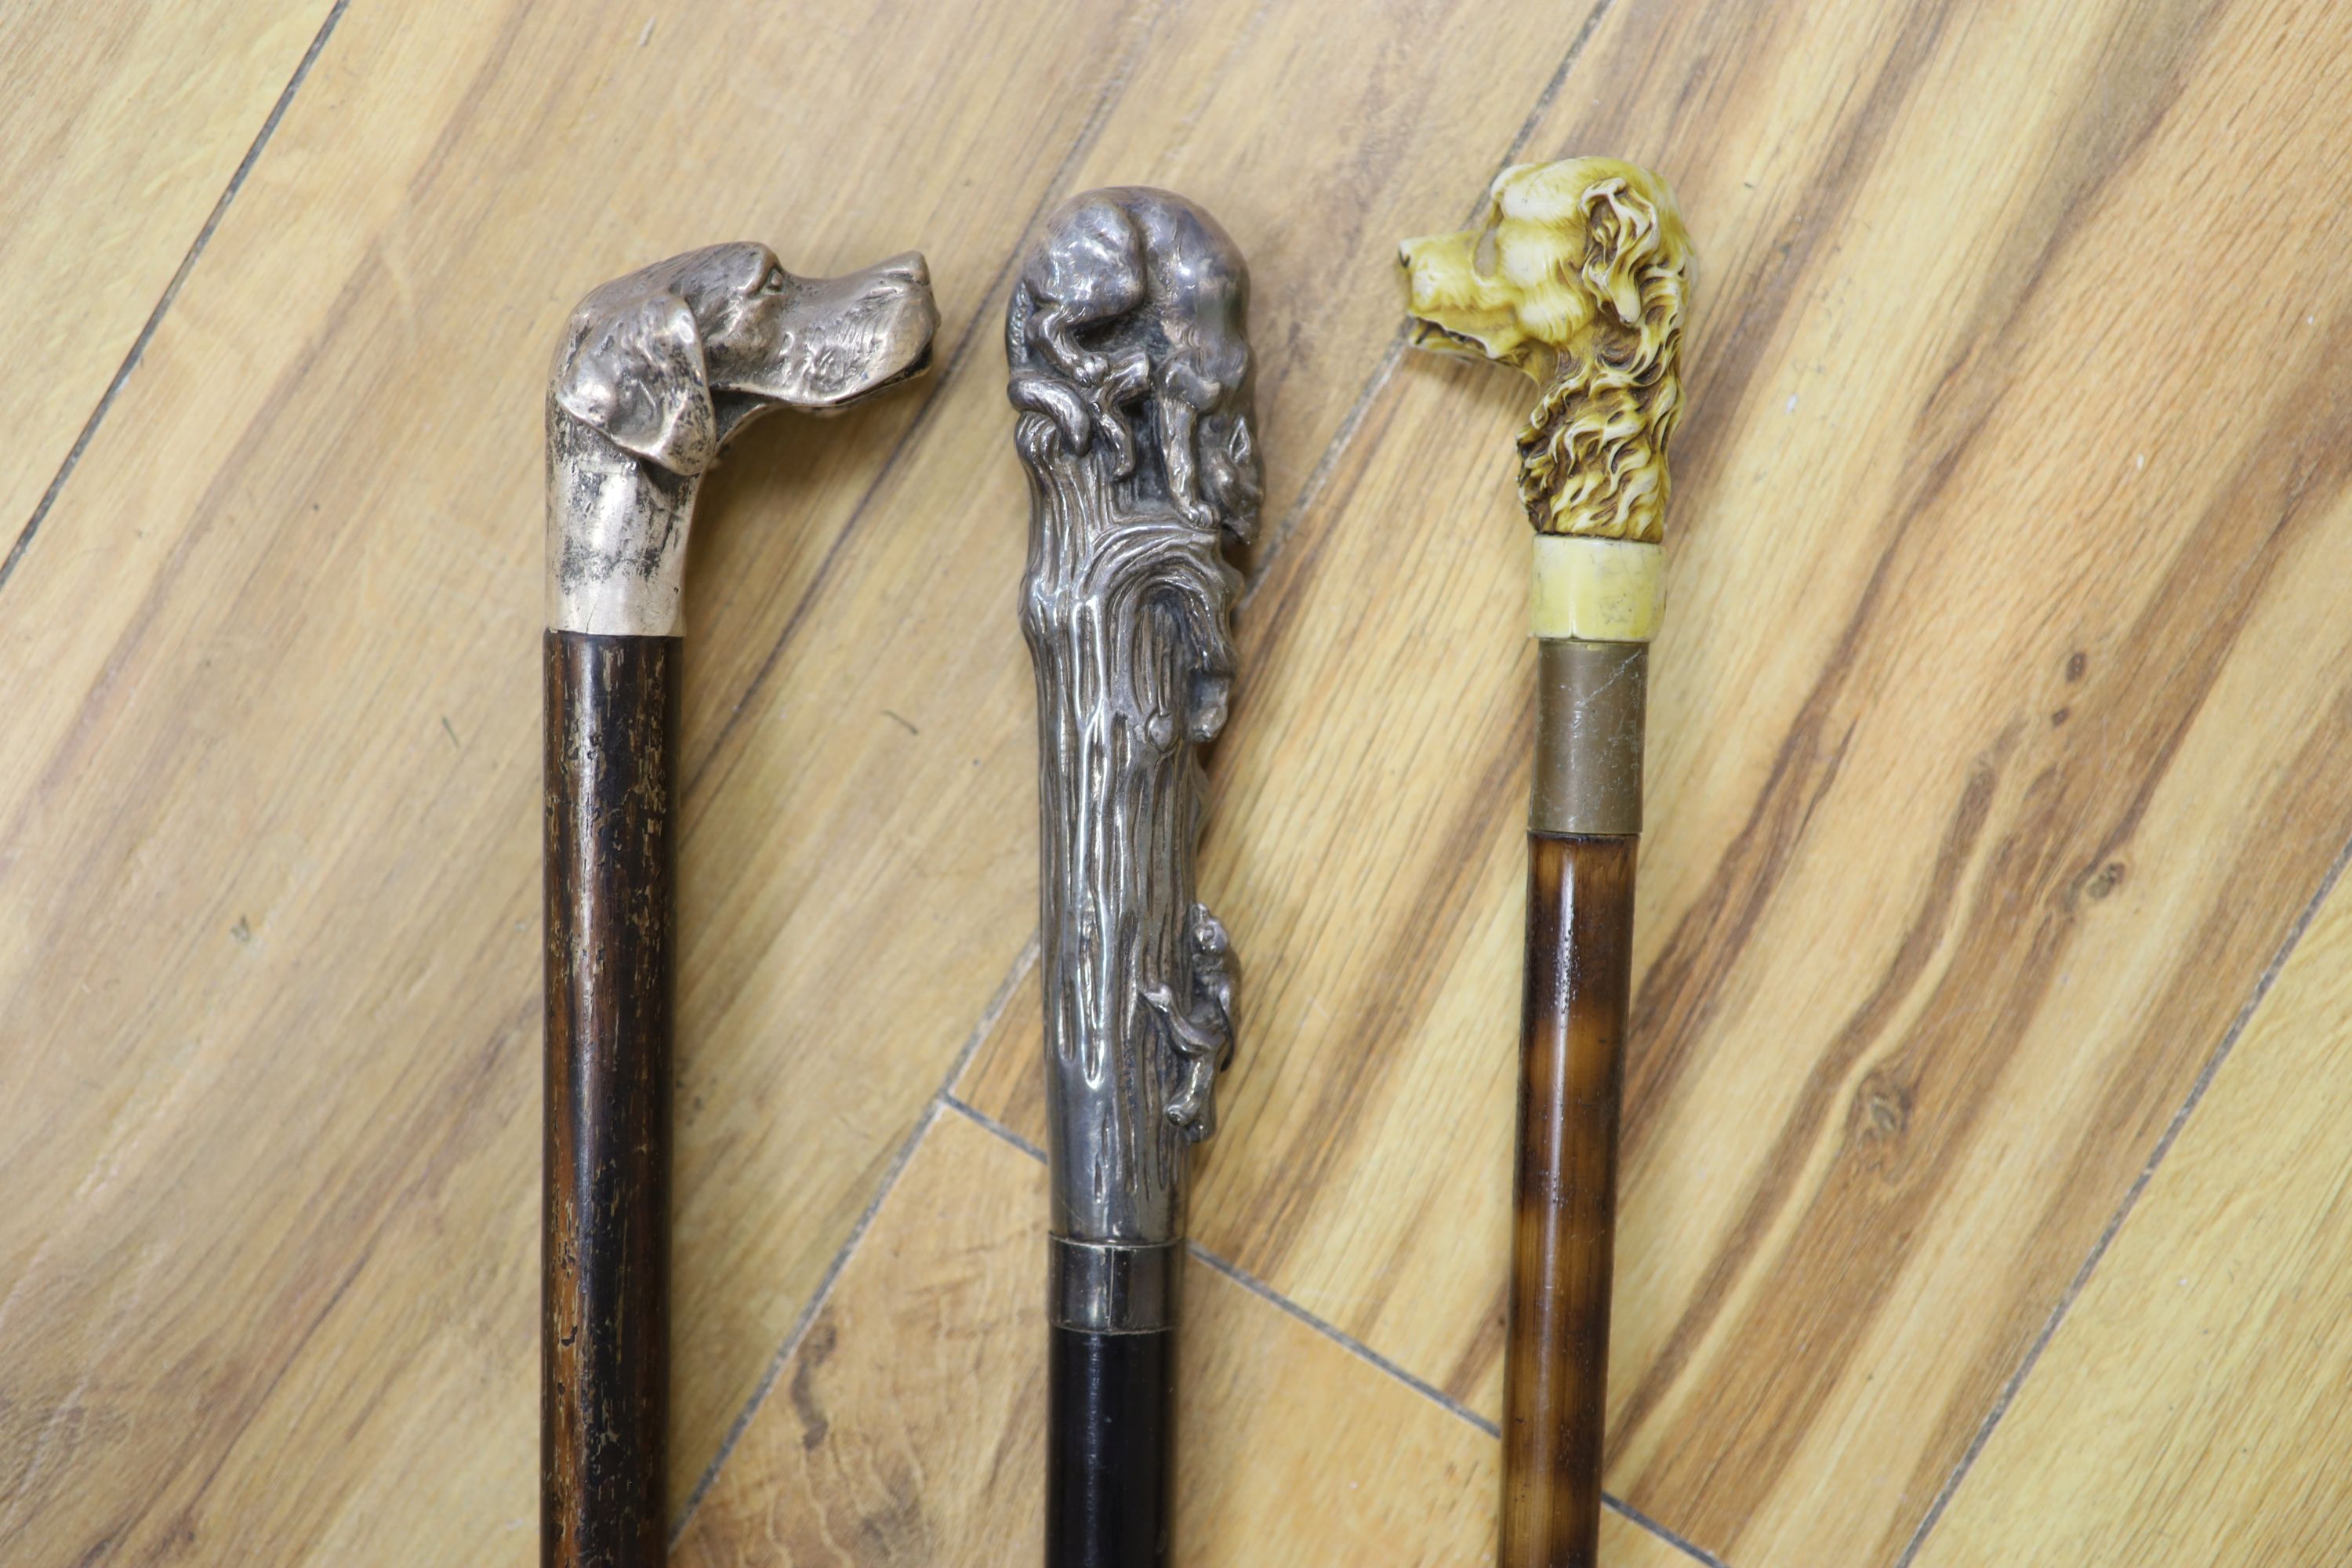 A big cat sterling-mounted cane, a dogs head 925 sterling mounted cane and a resin dogs head mounted cane